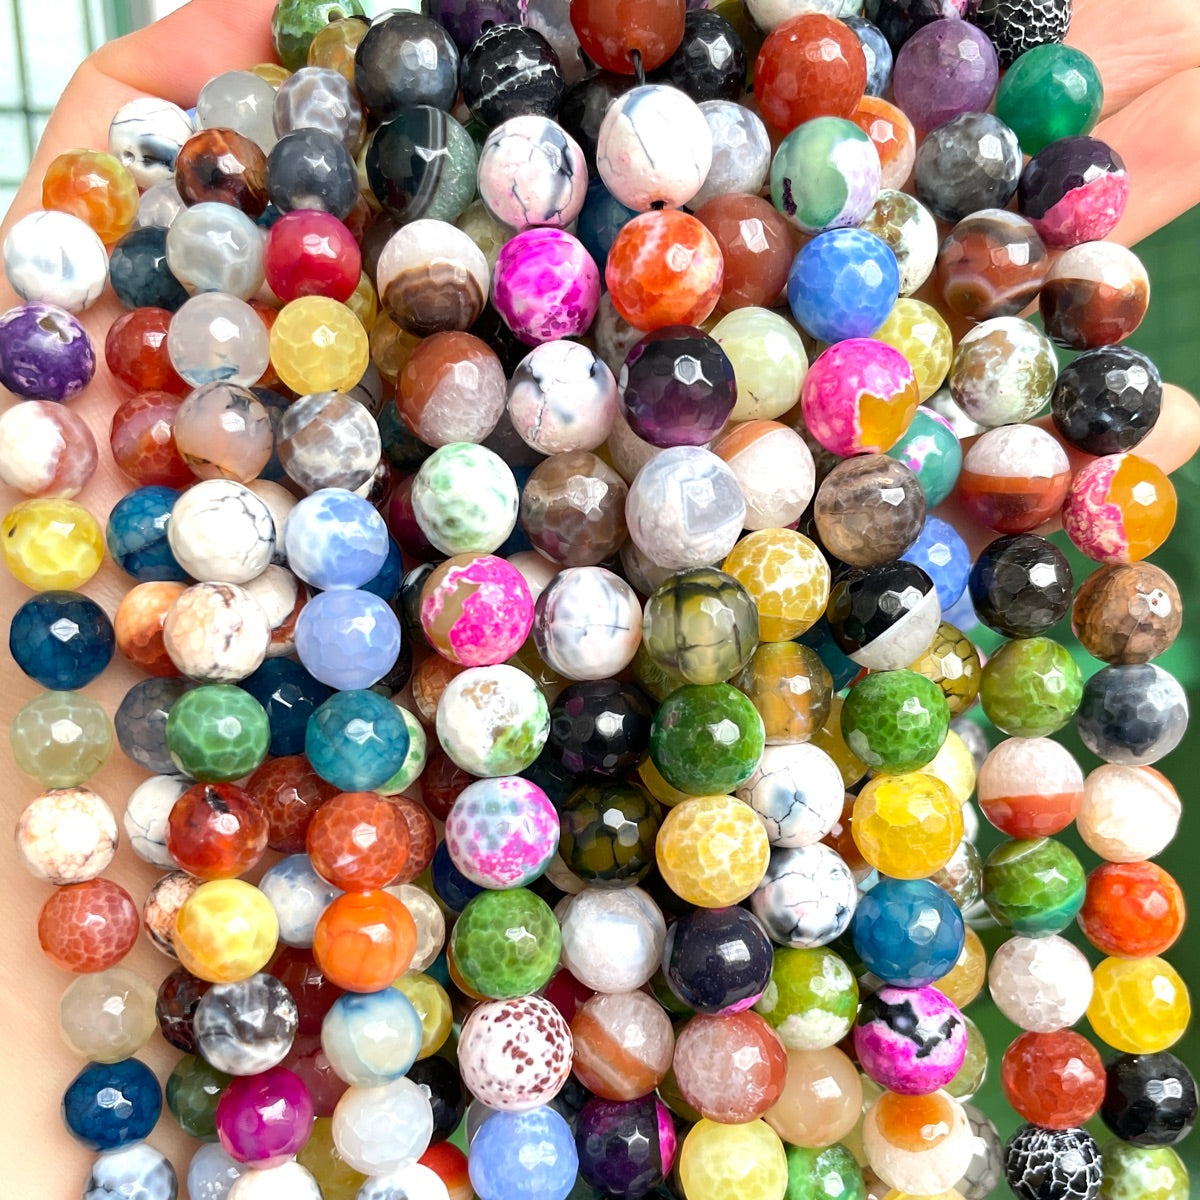 2 Strands/lot 8/1012mm MultIcolor Colorful Fire Agate Faceted Stone Beads Stone Beads Faceted Agate Beads New Beads Arrivals Charms Beads Beyond